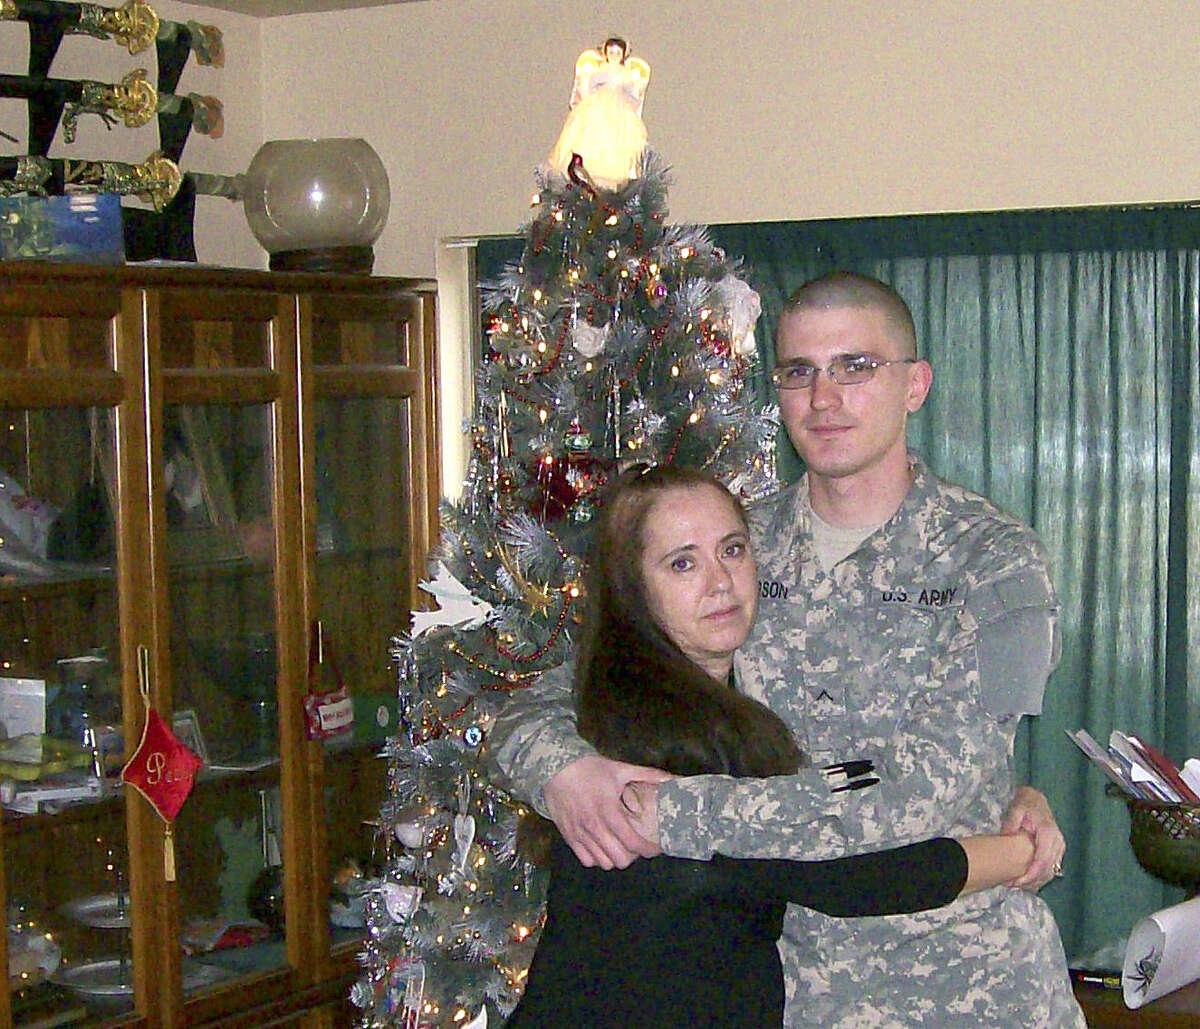 Michael Pearson poses with his mother, Sheryll Pearson, in 2008, during the last Christmas he would spend with his family. “He was the most exciting kid ever in the whole world,” she said.